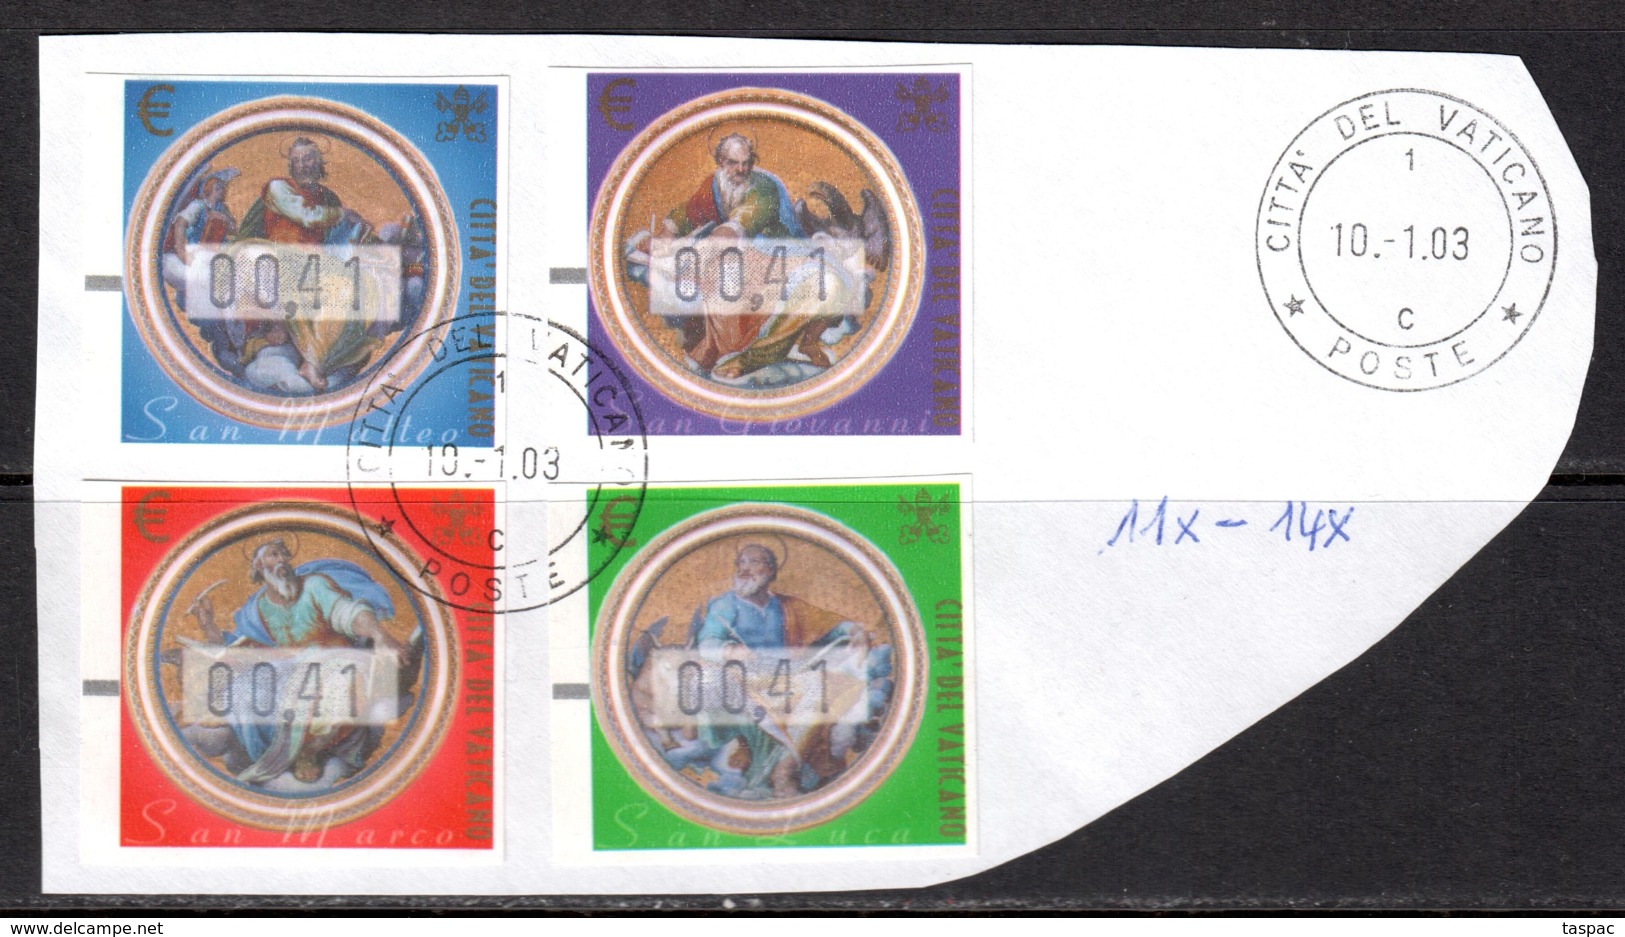 Vatican 2002 ATM Mi# 11-14 X Used - Ordinary Paper - The Four Evangelists - Franking Machines (EMA)